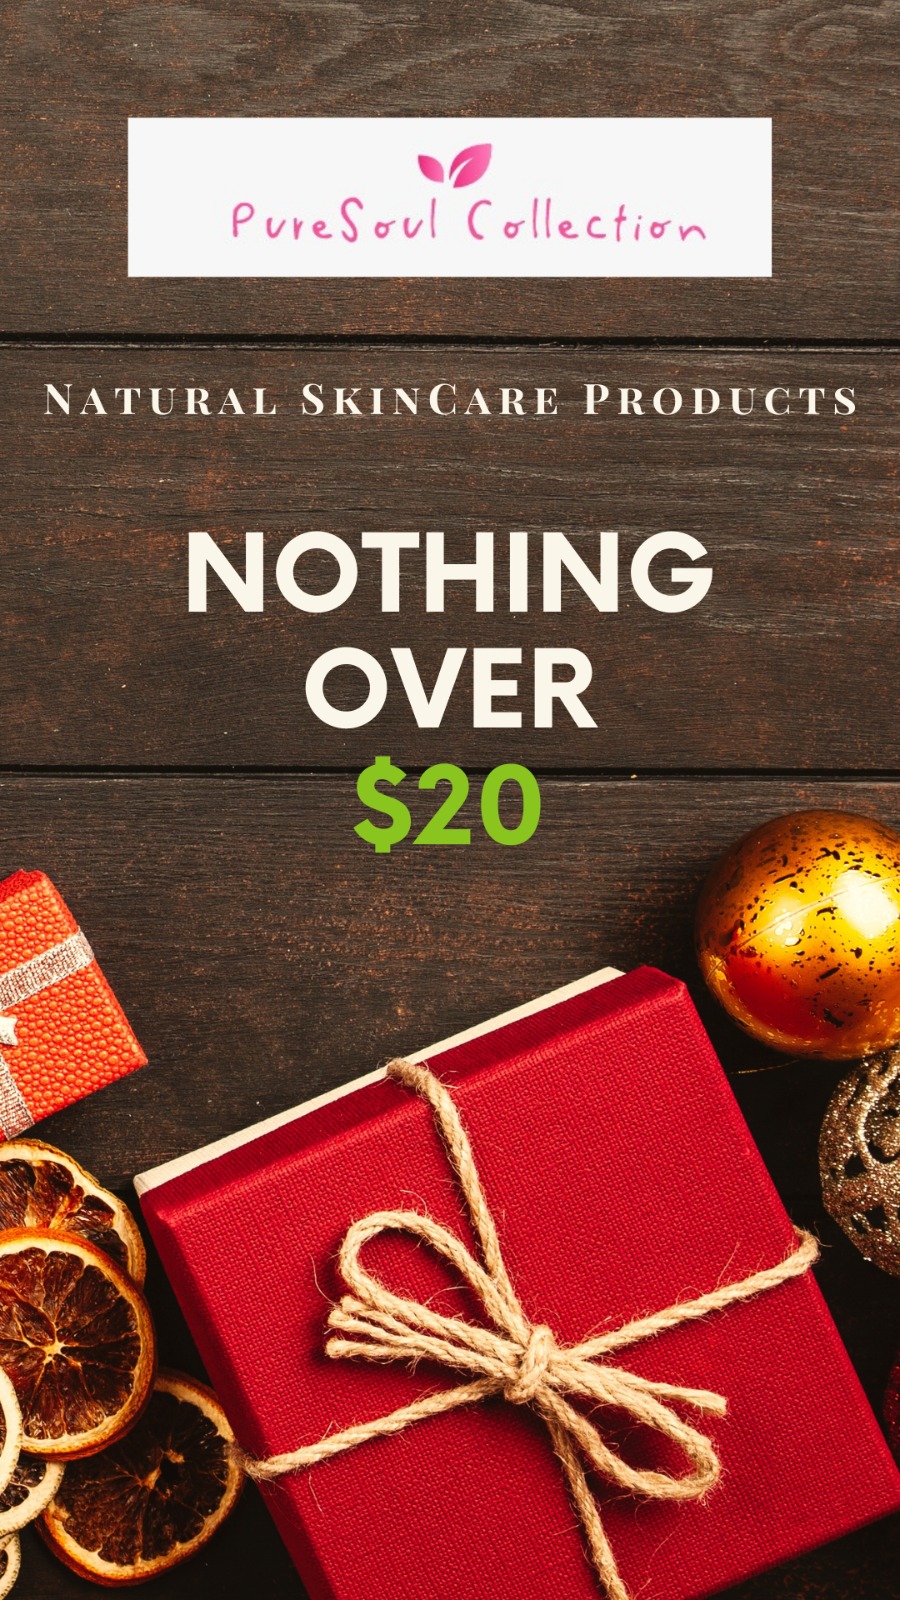 Shop nothing over $20 plus 20% discount on Natural Skin Care Products @PureSoul Collection